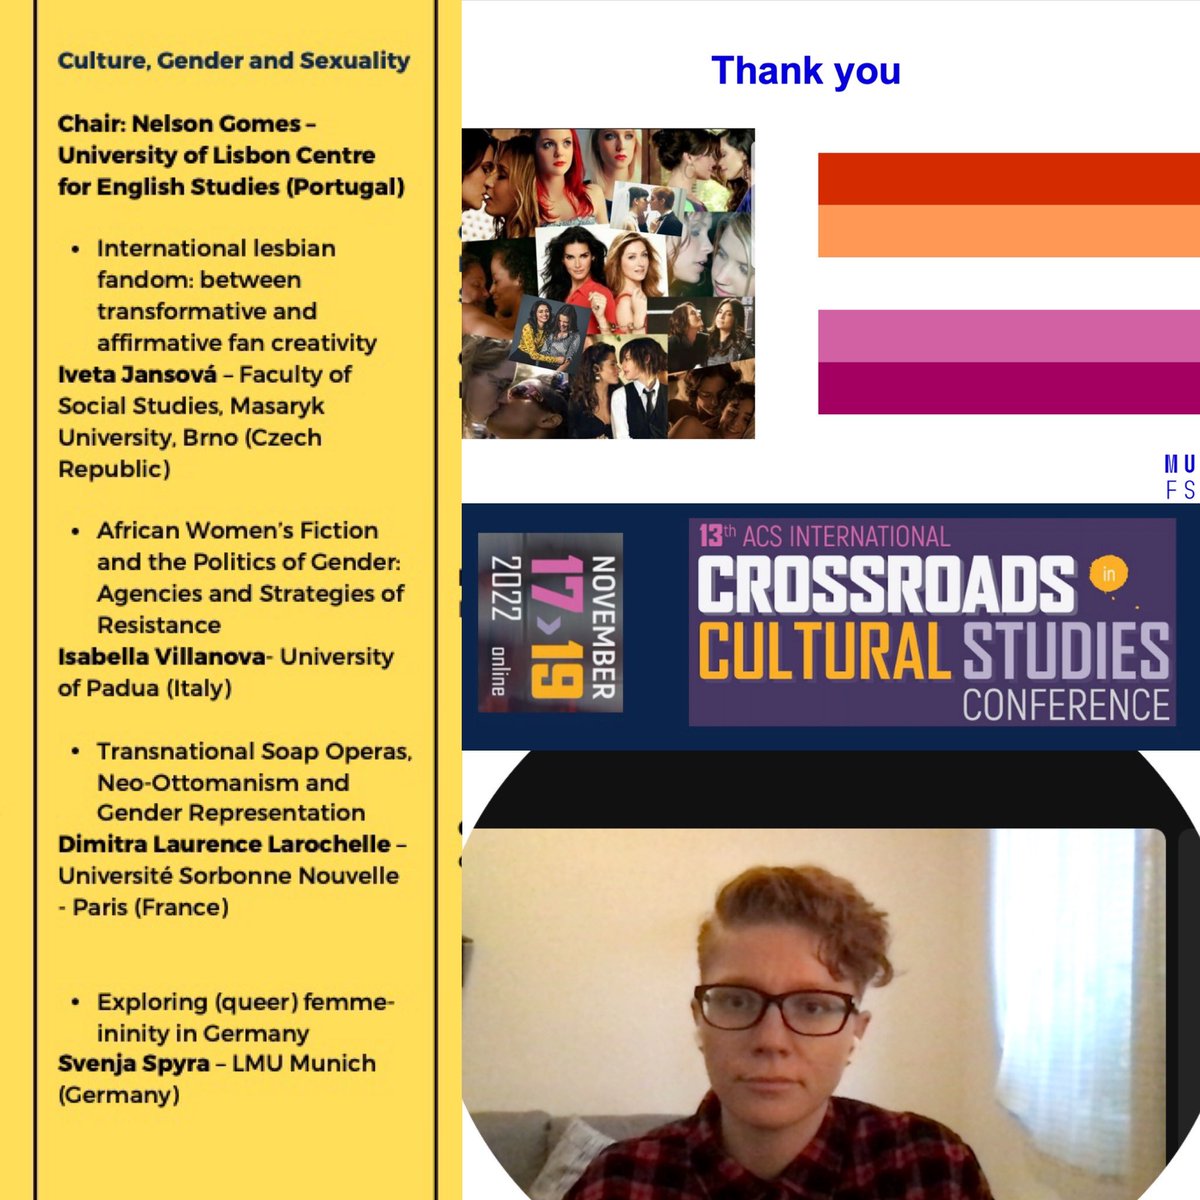 Glad to be able talk about “lesbian/wlw fandom” at @crossroads_20 in the presence of great panelists. #conference #culturegendersexualitypanel #lisbon #online #wlw #academialife #fanstudies #counterpublics